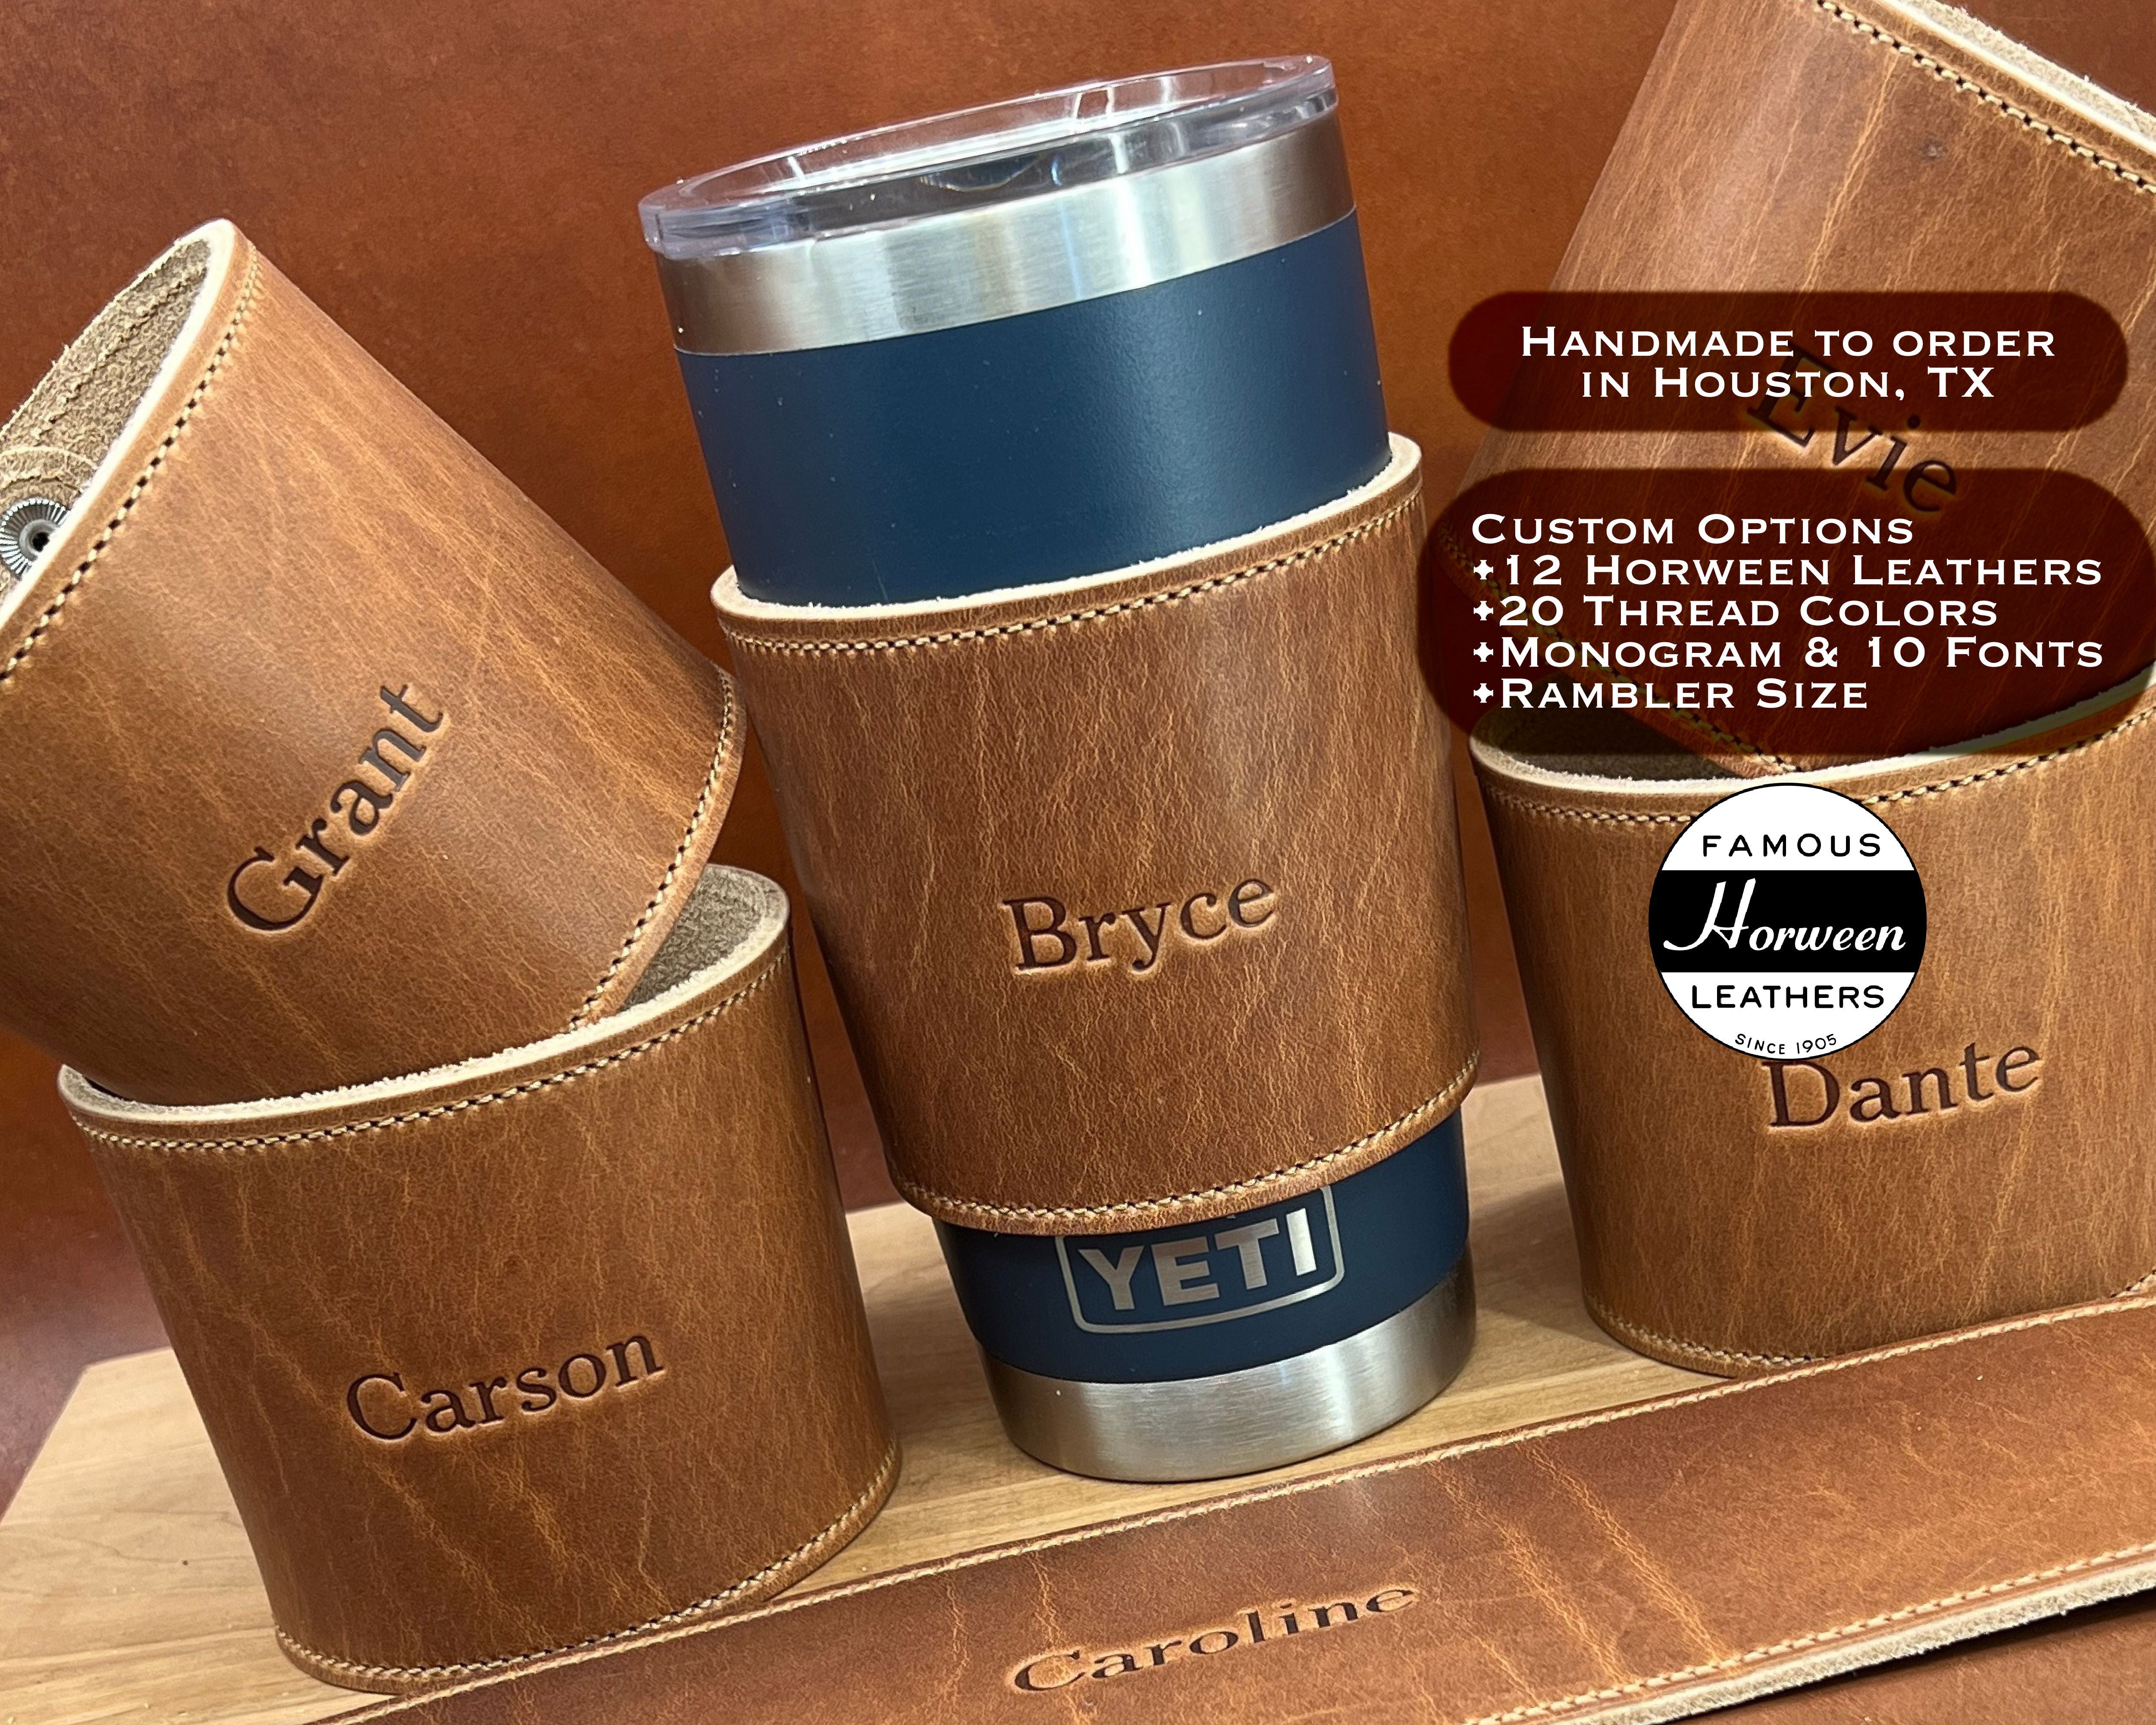 Yeti Tumbler Sleeve, Yeti Sleeve, Tumbler Sleeve, Fathers Day Gift,  Personalized Accessories, Leather Koozie, Mens Valentines Gift, Yeti 